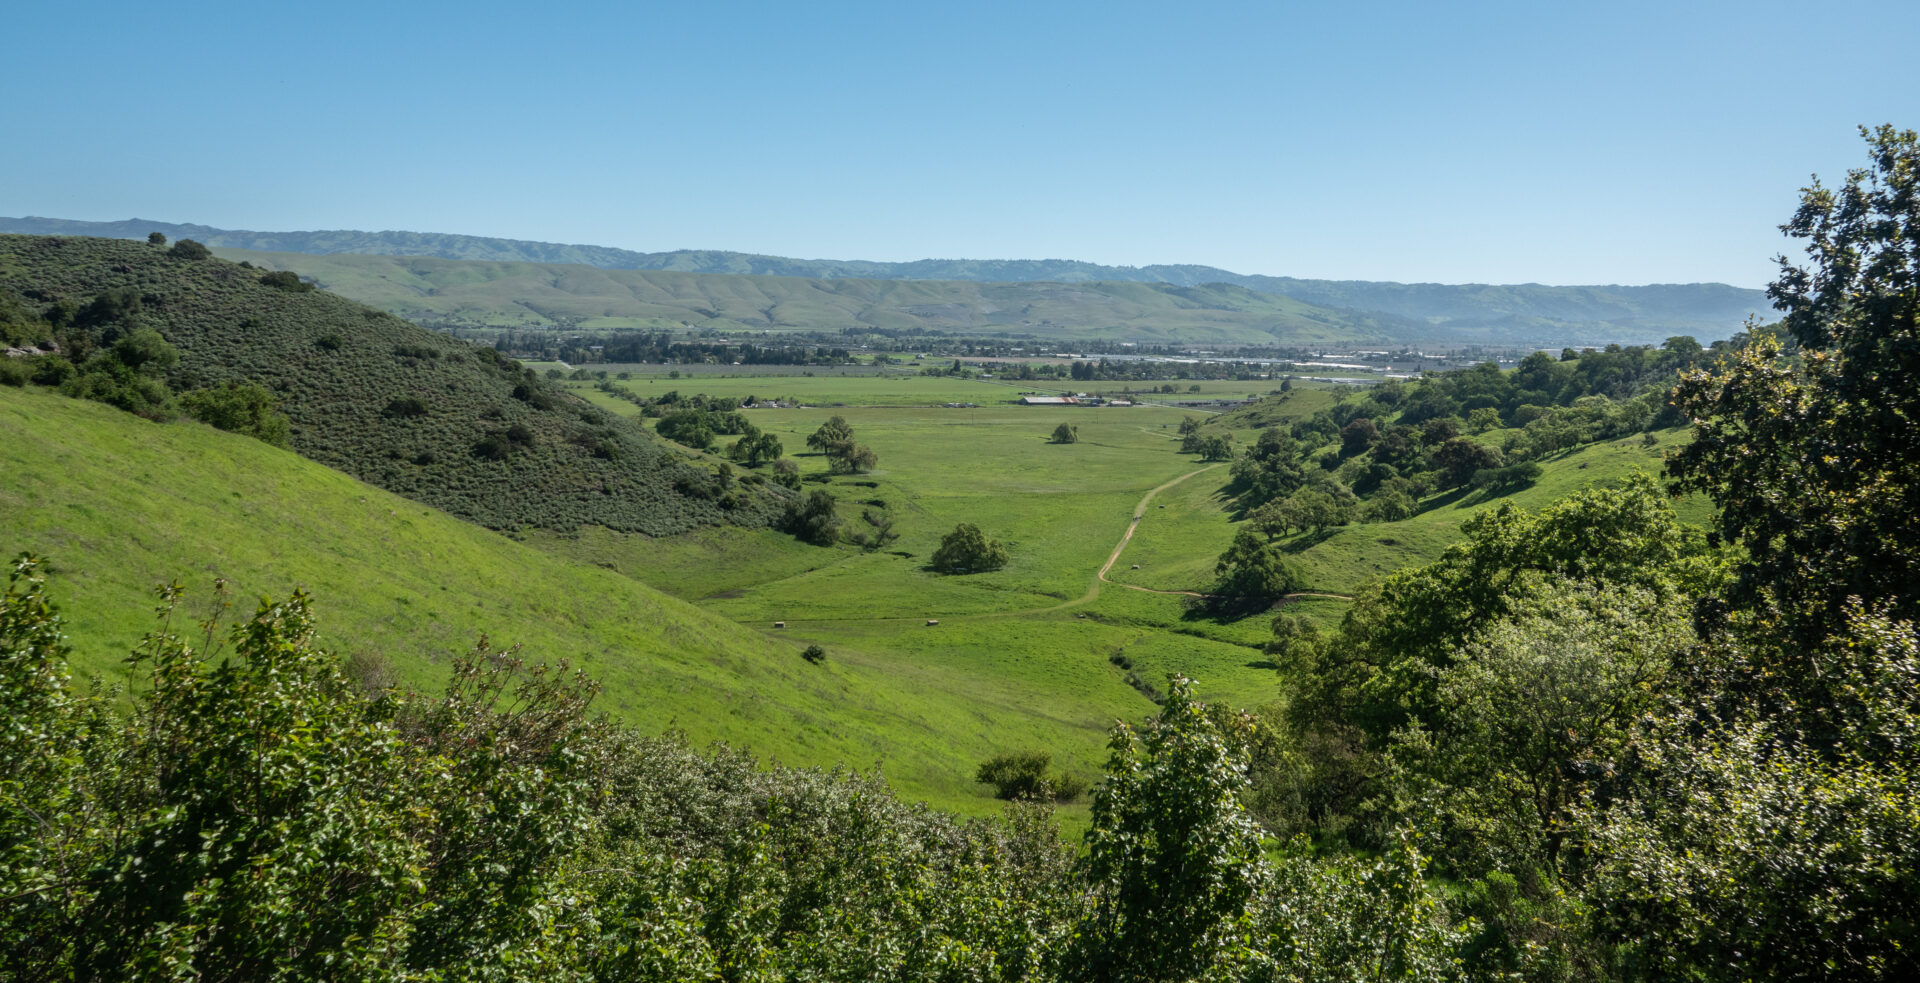 Coyote Valley panoramic view by Dan Quinn